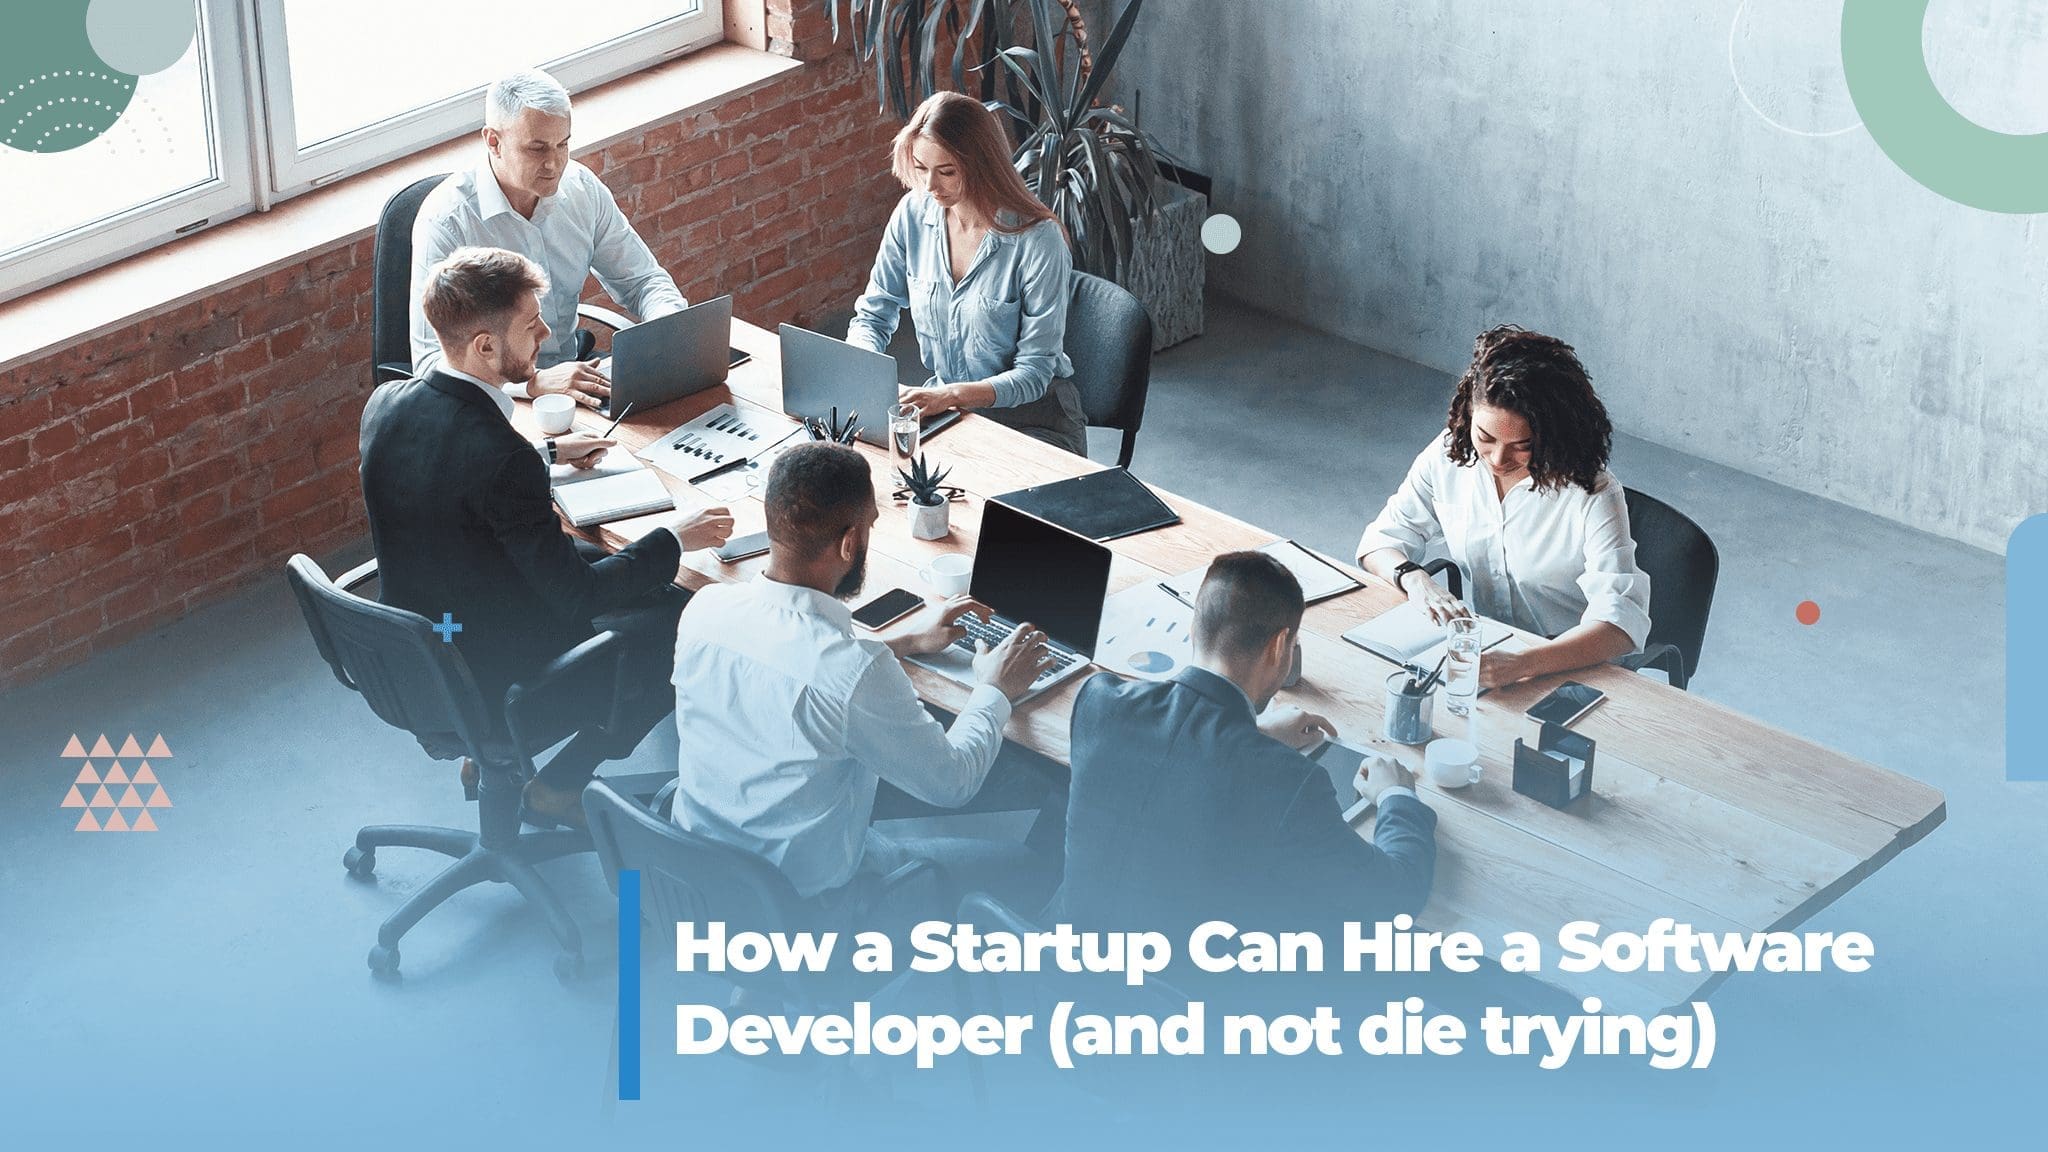 Startup company hires software developers